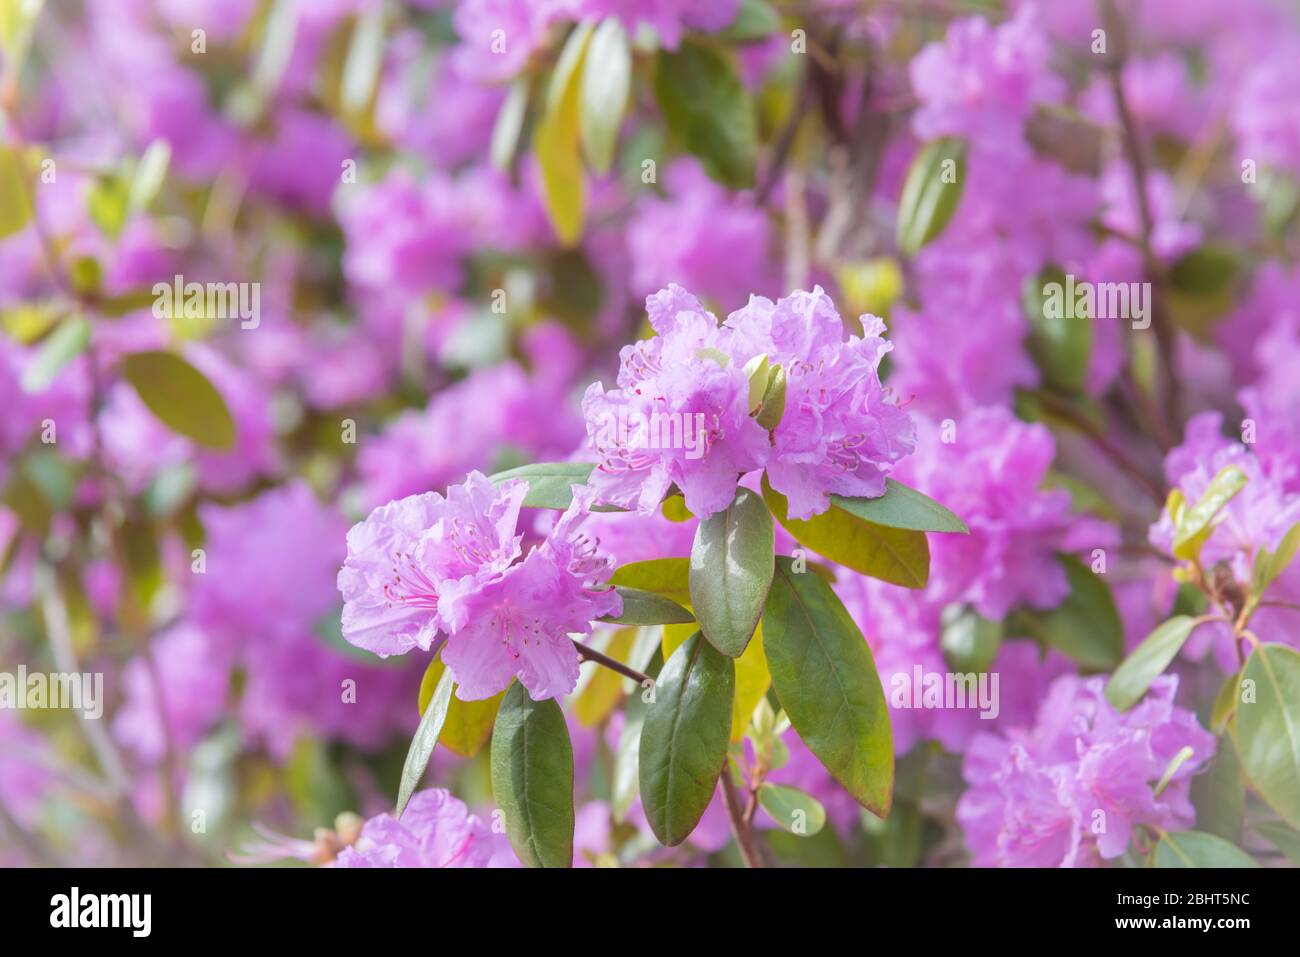 Rhododendron bush covered in pink flowers in springtime Stock Photo